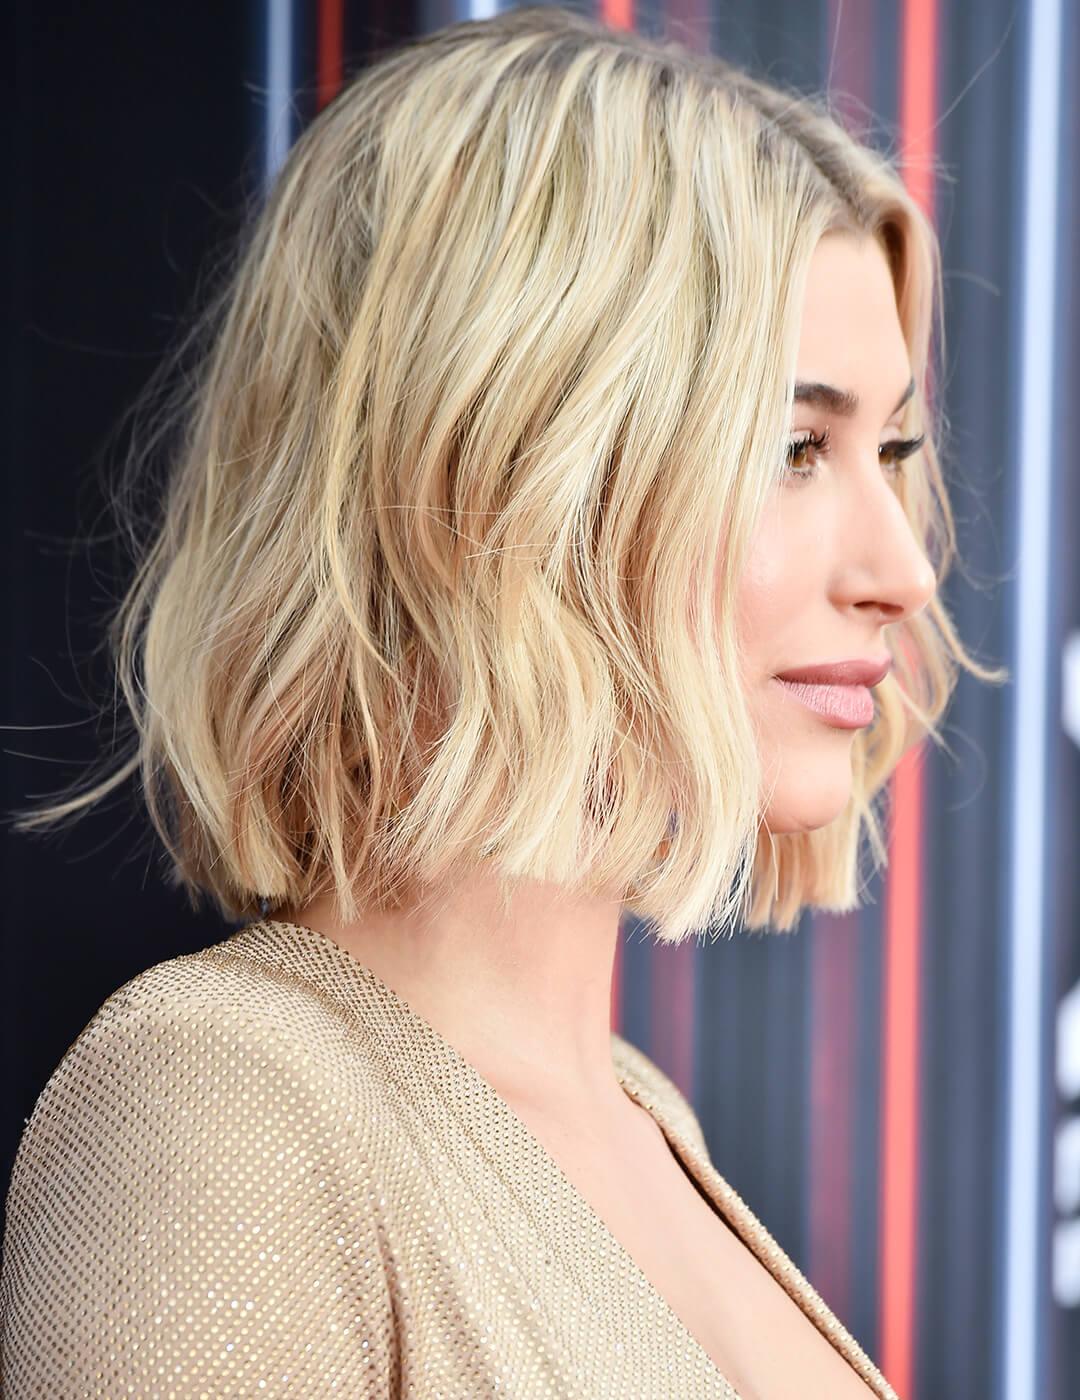 A photo of Hailey Baldwin in sideways characterized by her messy, long bob blonde hair dressed in a stunning beige gown on an abstract background